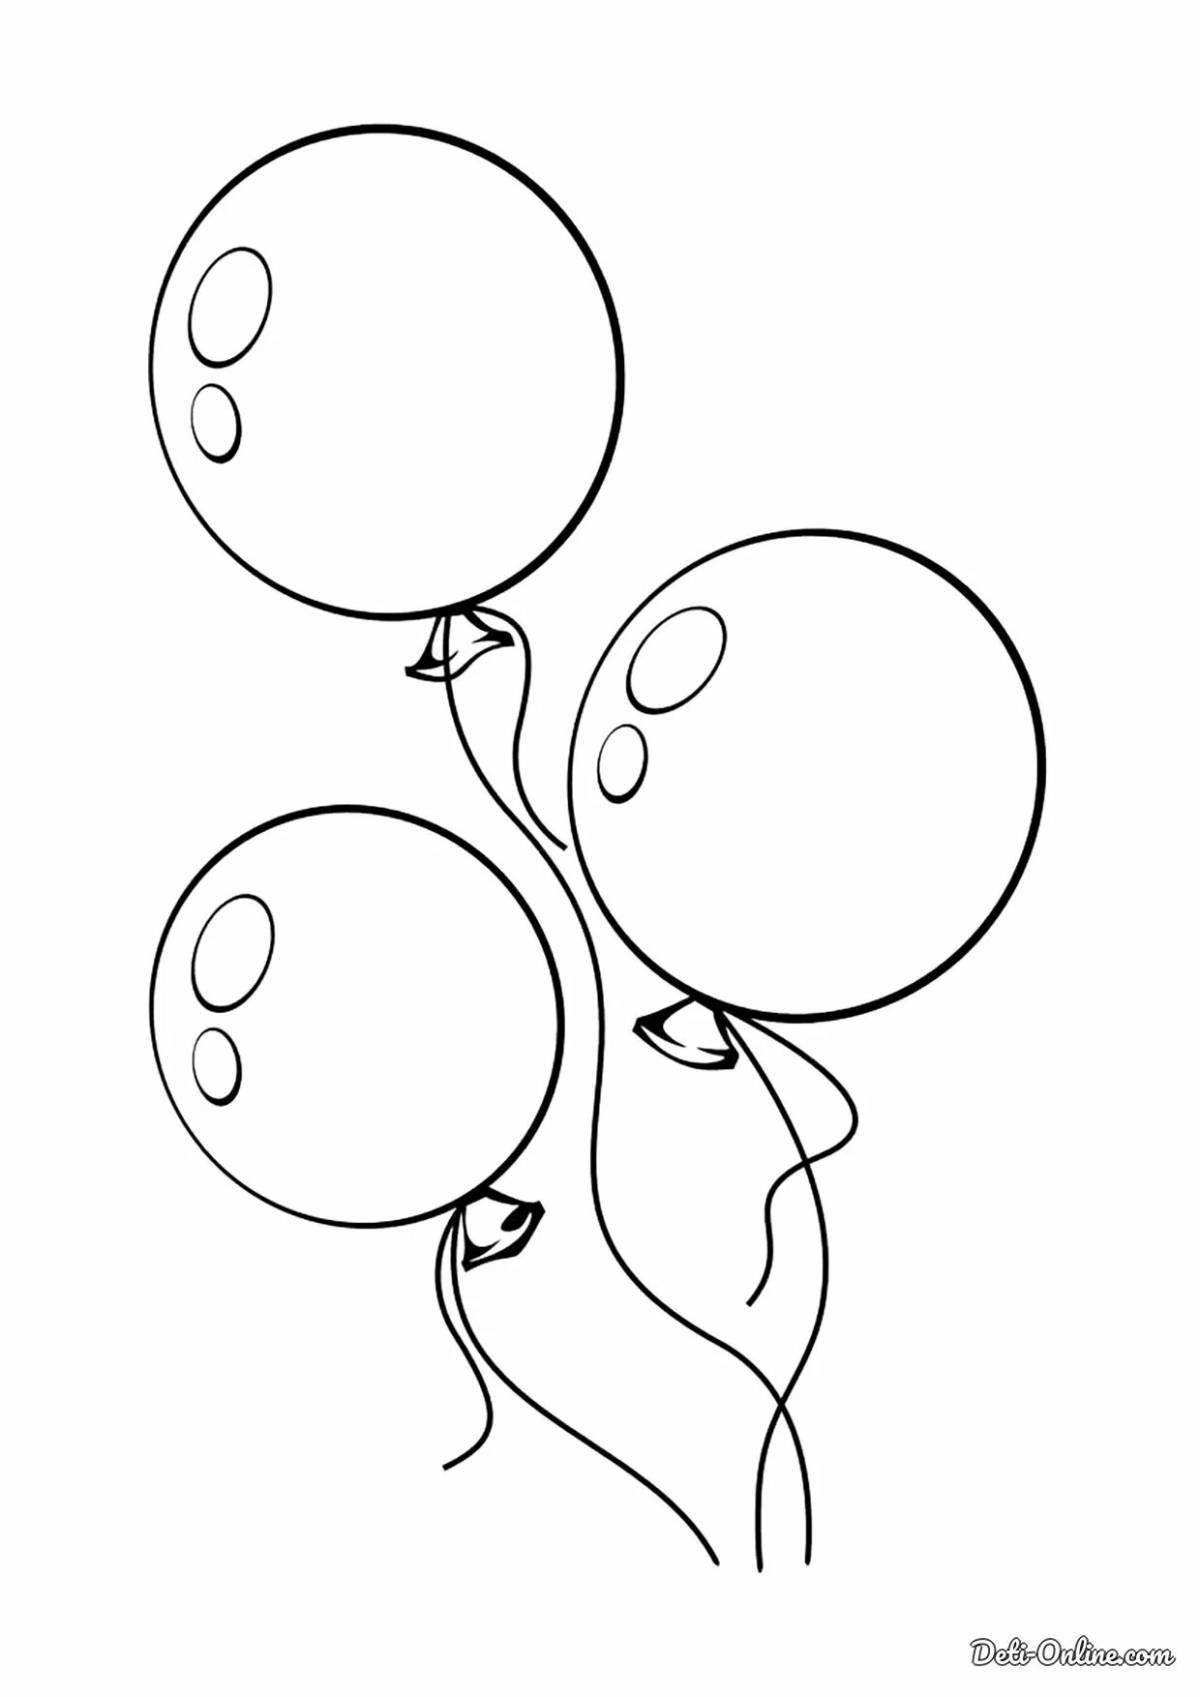 Colorful balloons for 2-3 year olds